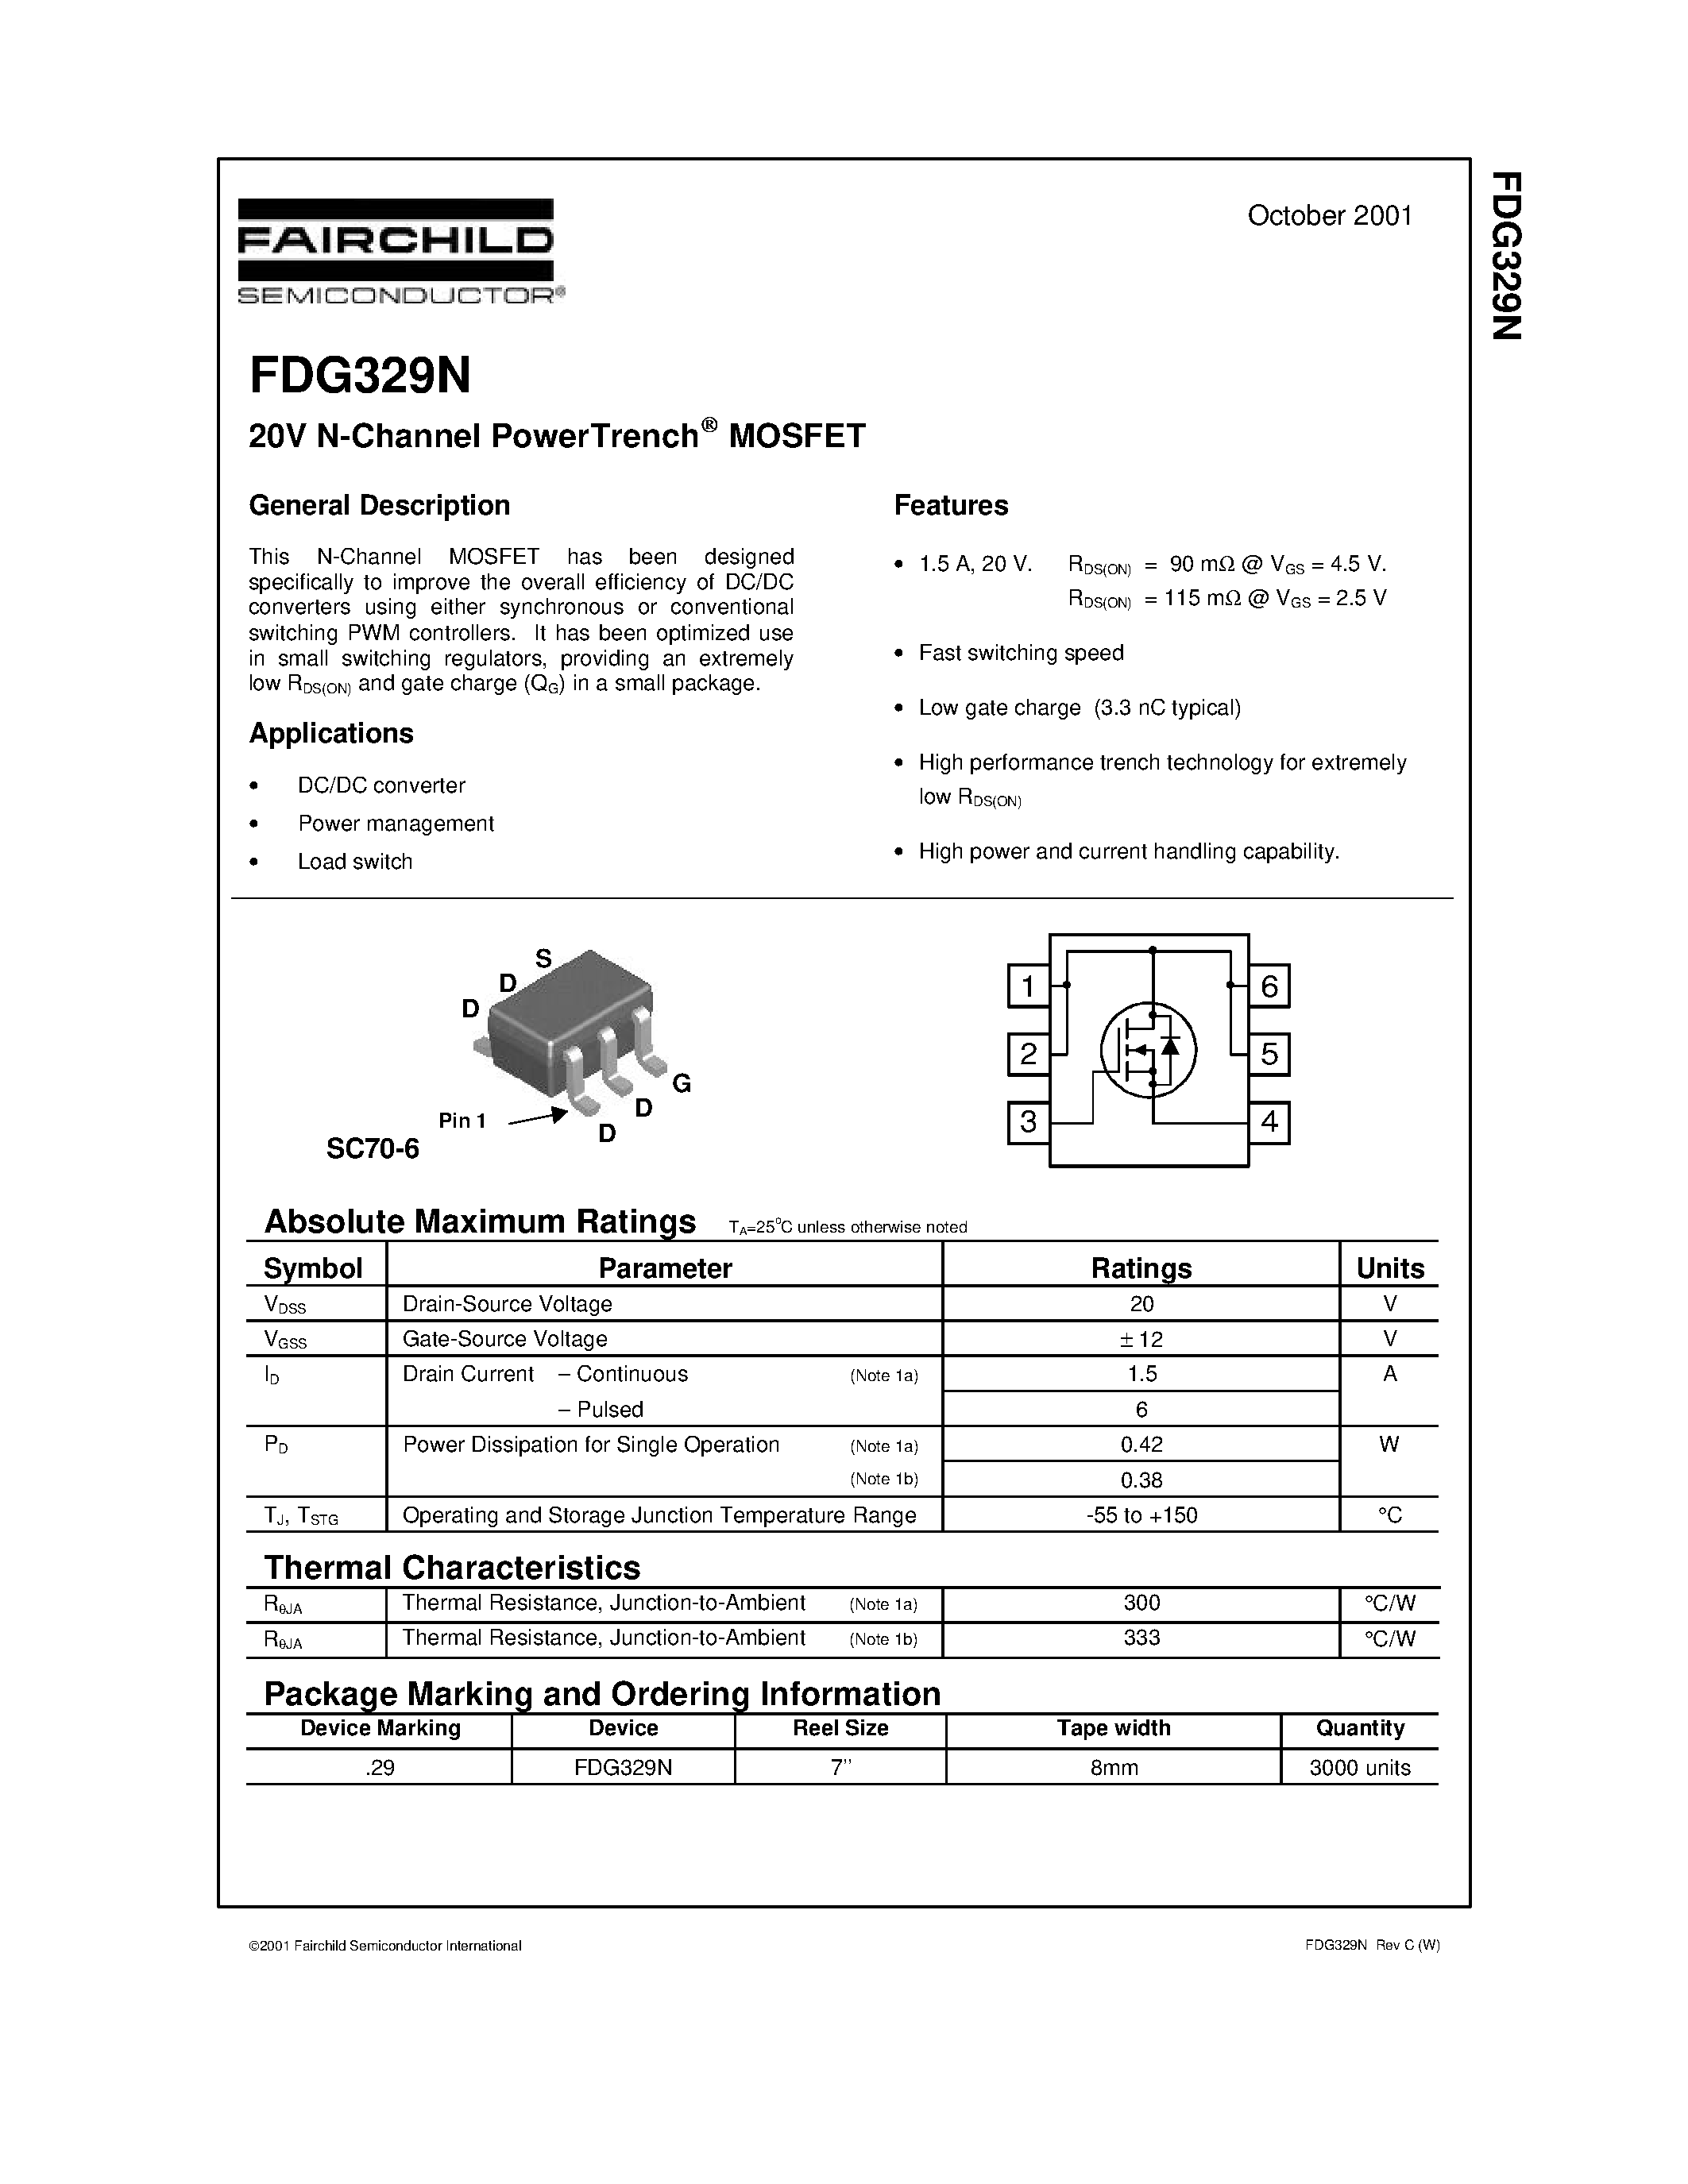 Даташит FDG329N-20V N-Channel PowerTrench MOSFET страница 1